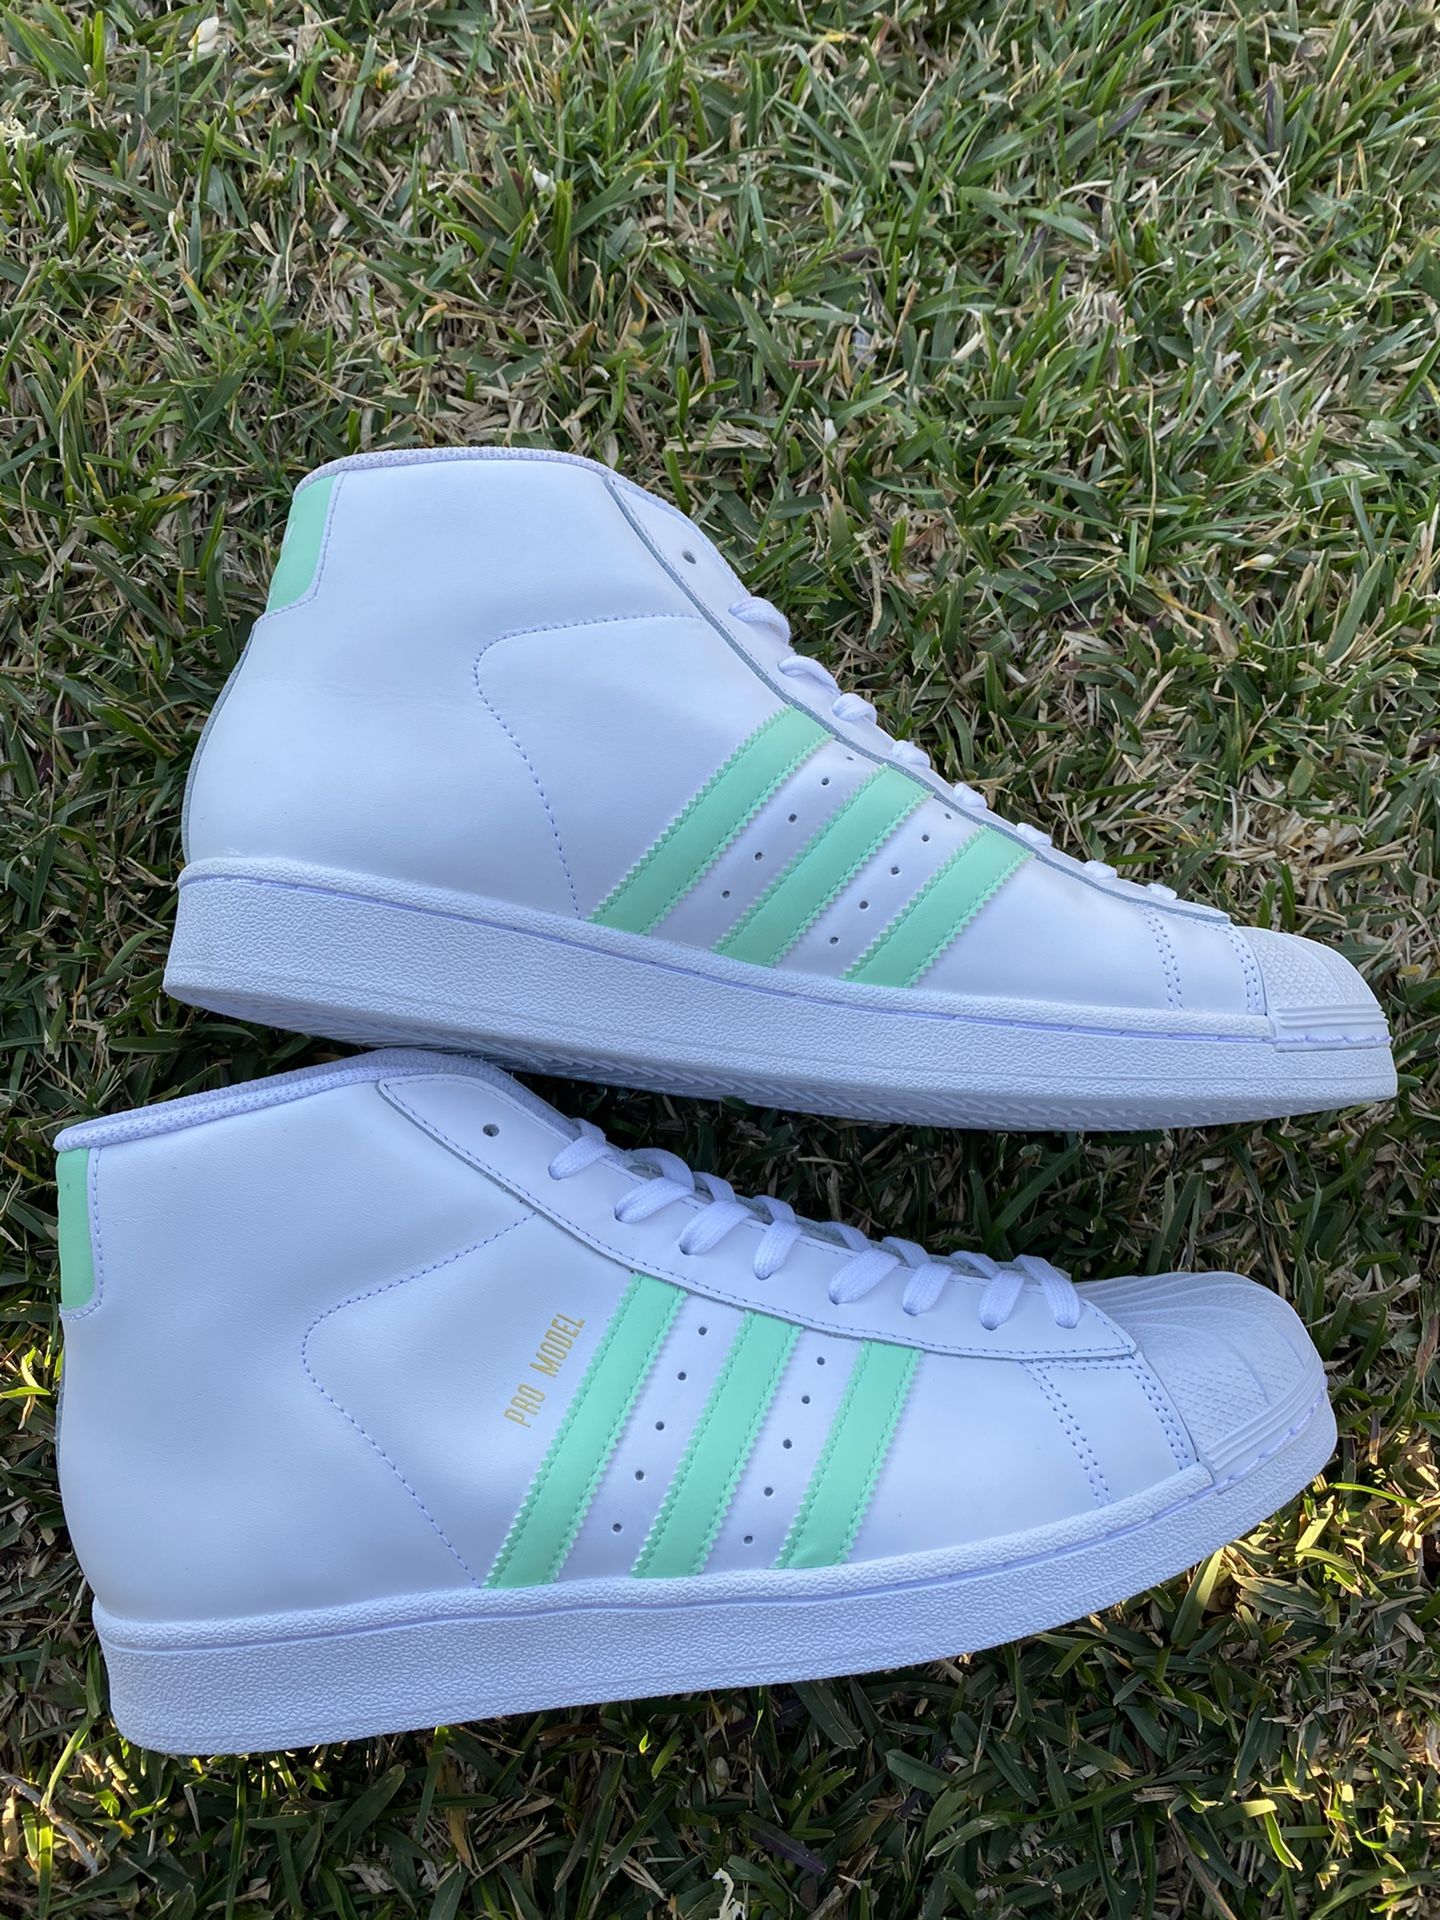 Adidas Pro Model White Green Gold Metallic Mens Size 10.5 and 8.5 $50